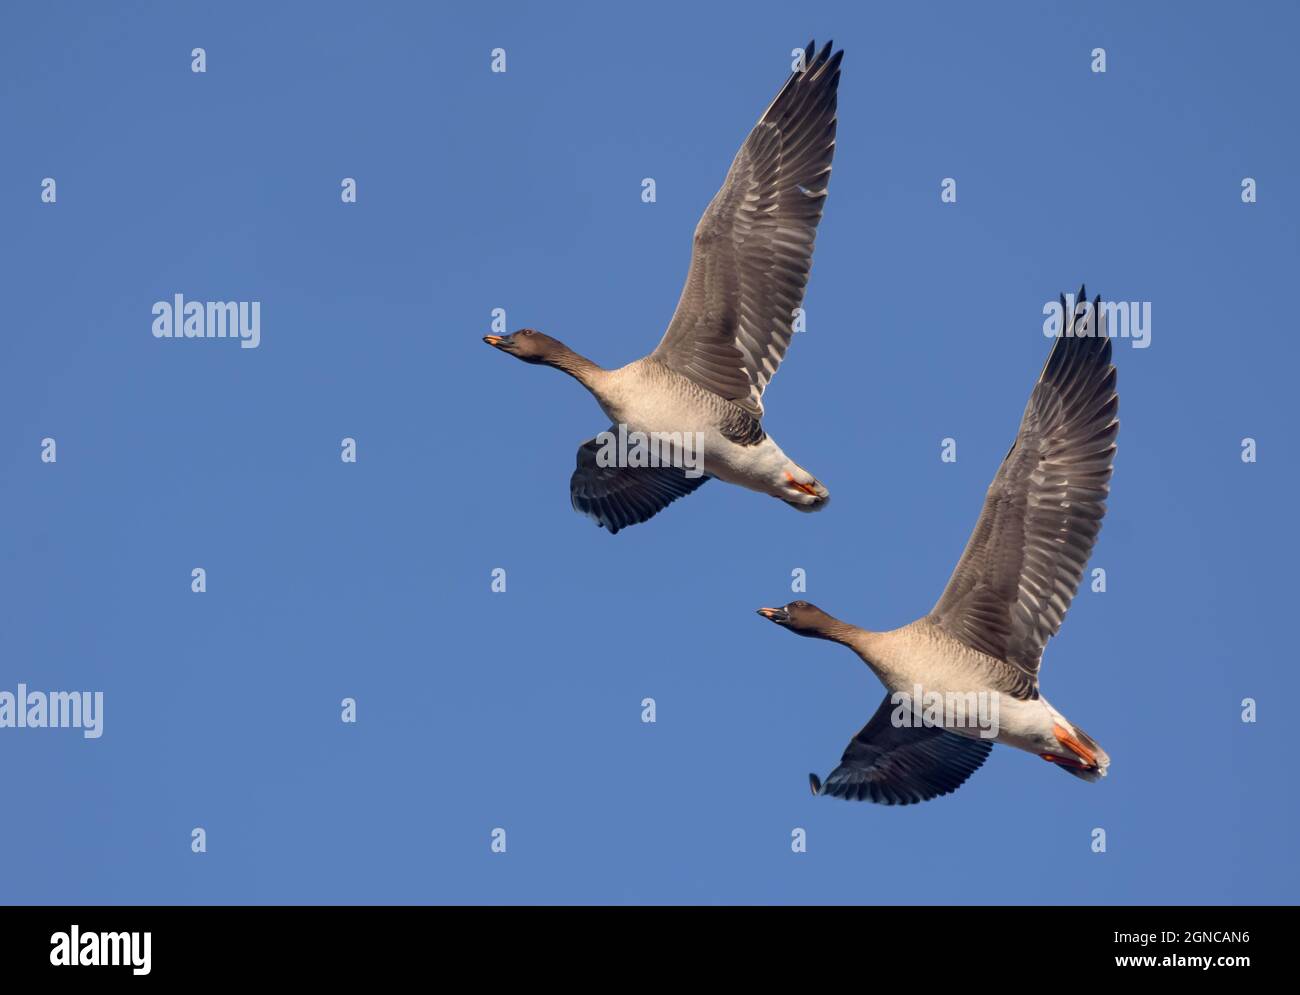 Loving couple of bean geese (Anser fabalis) sync fly in blue sky close to each other in spring Stock Photo